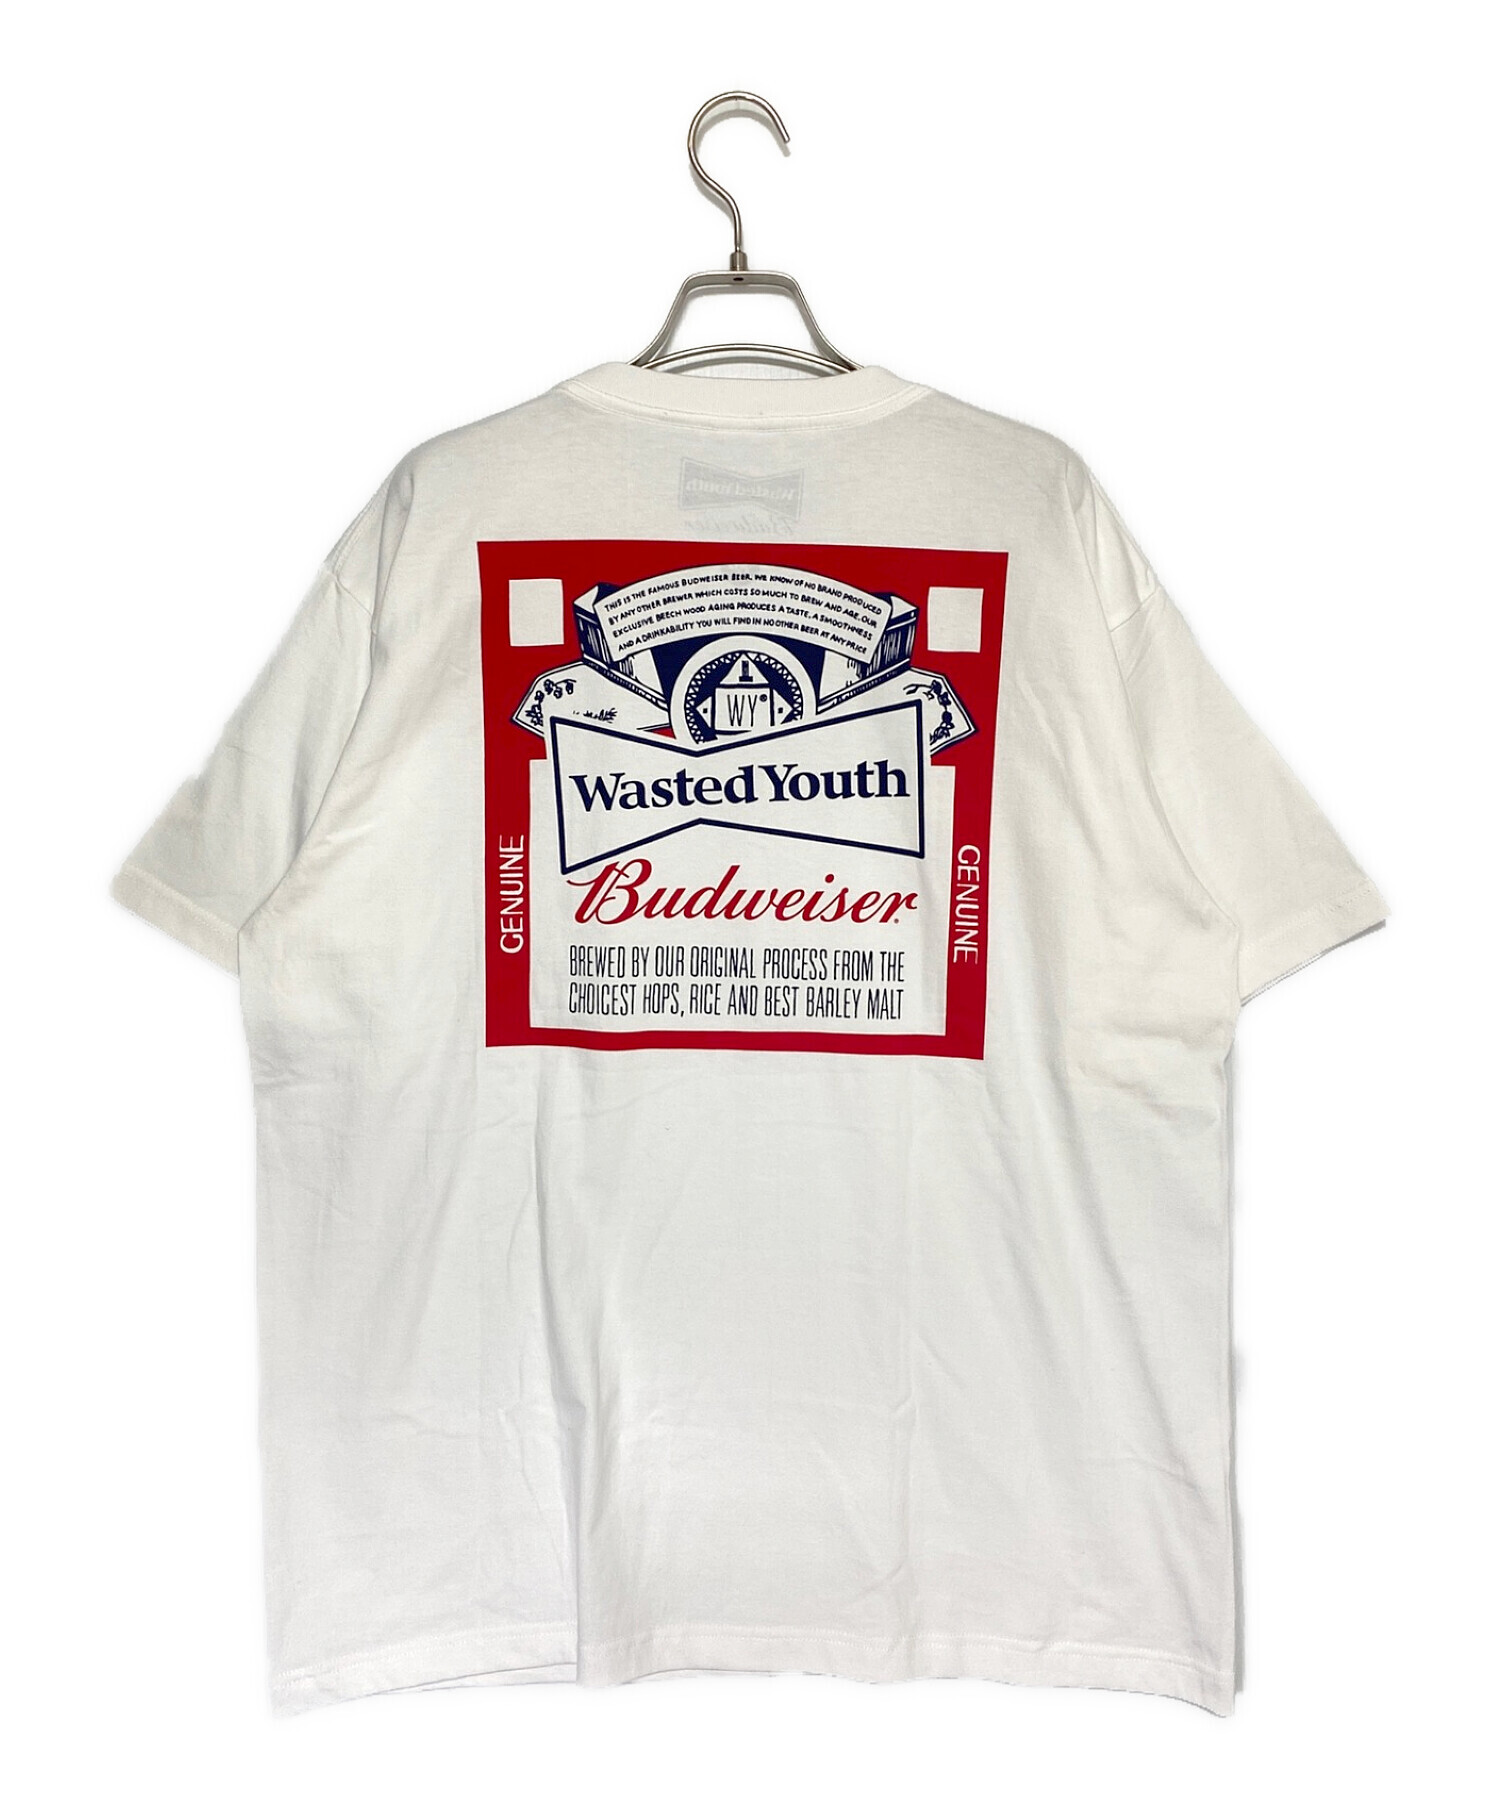 XL Wasted Youth Budweiser T-SHIRT